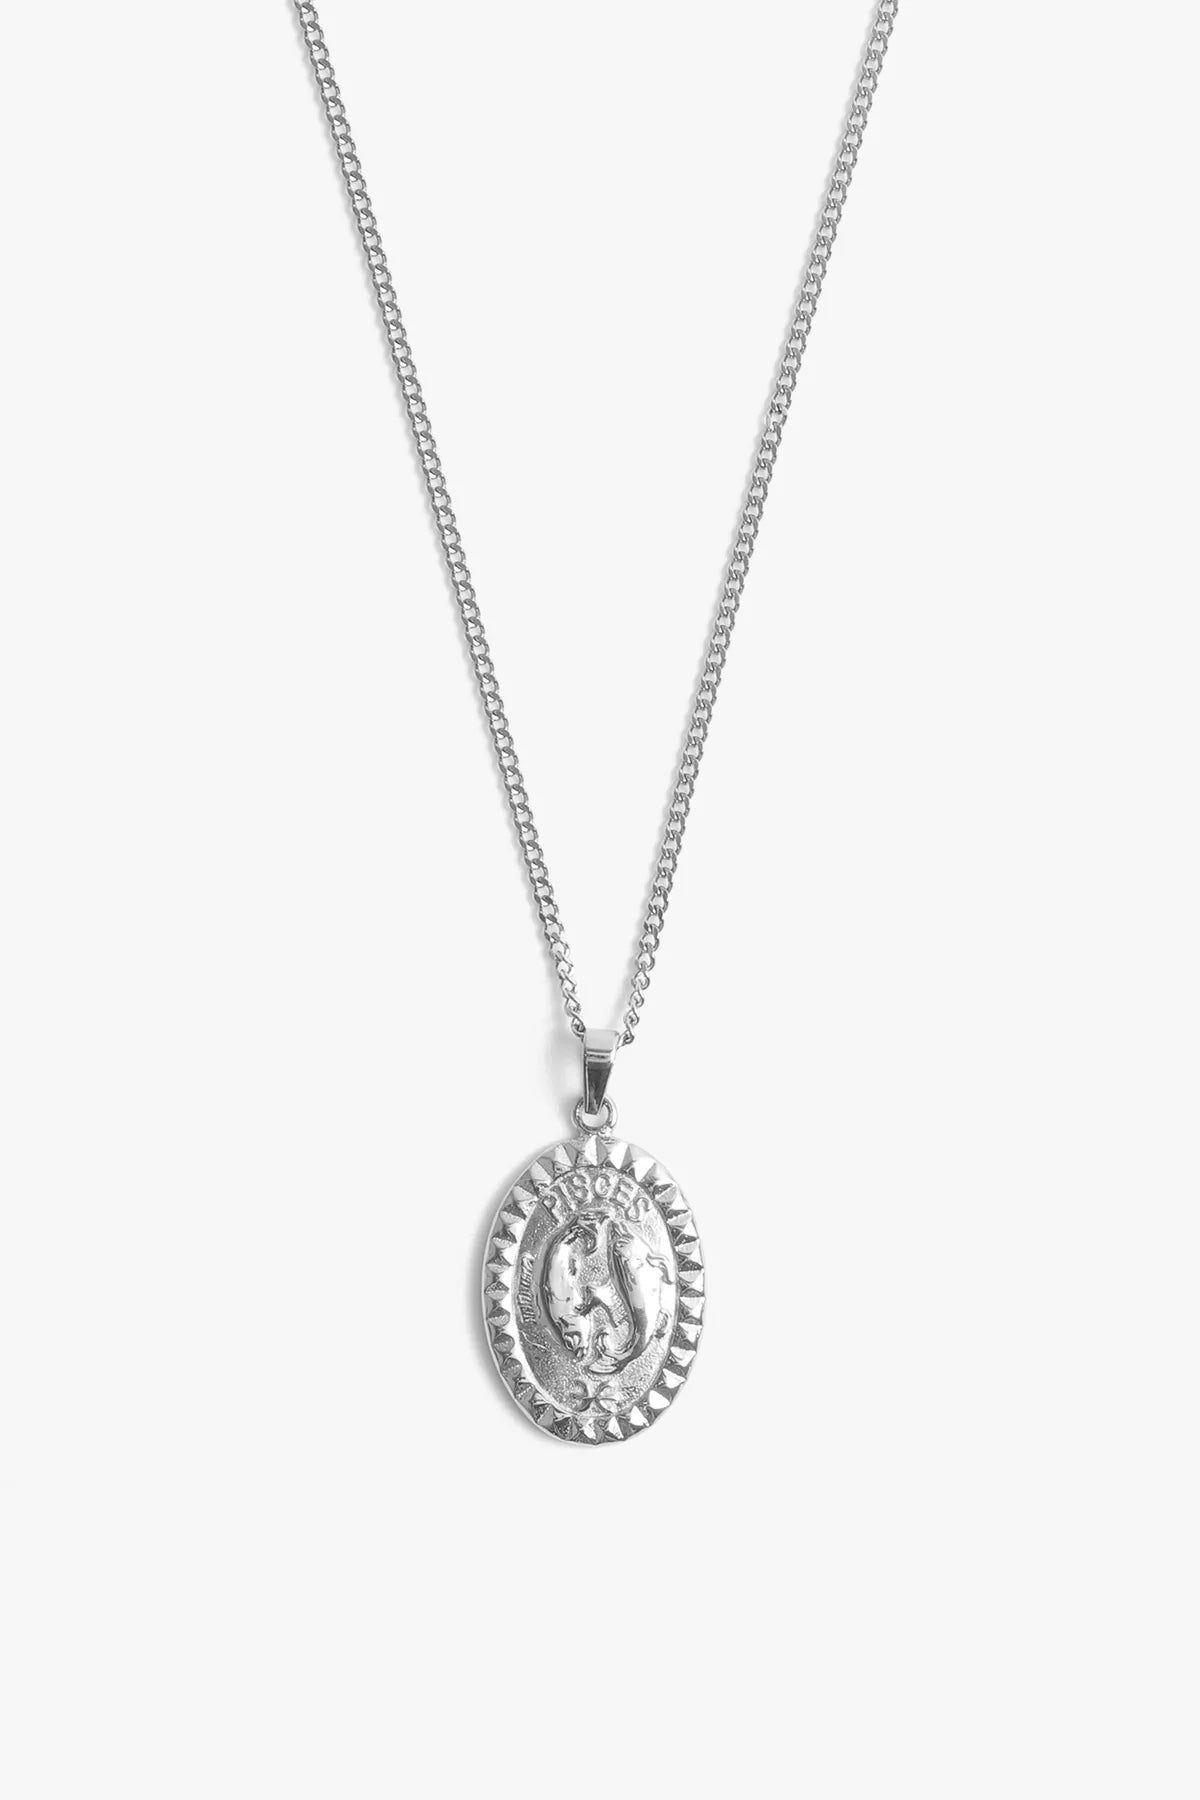 Marrin Costello - Pisces Necklace - Silver